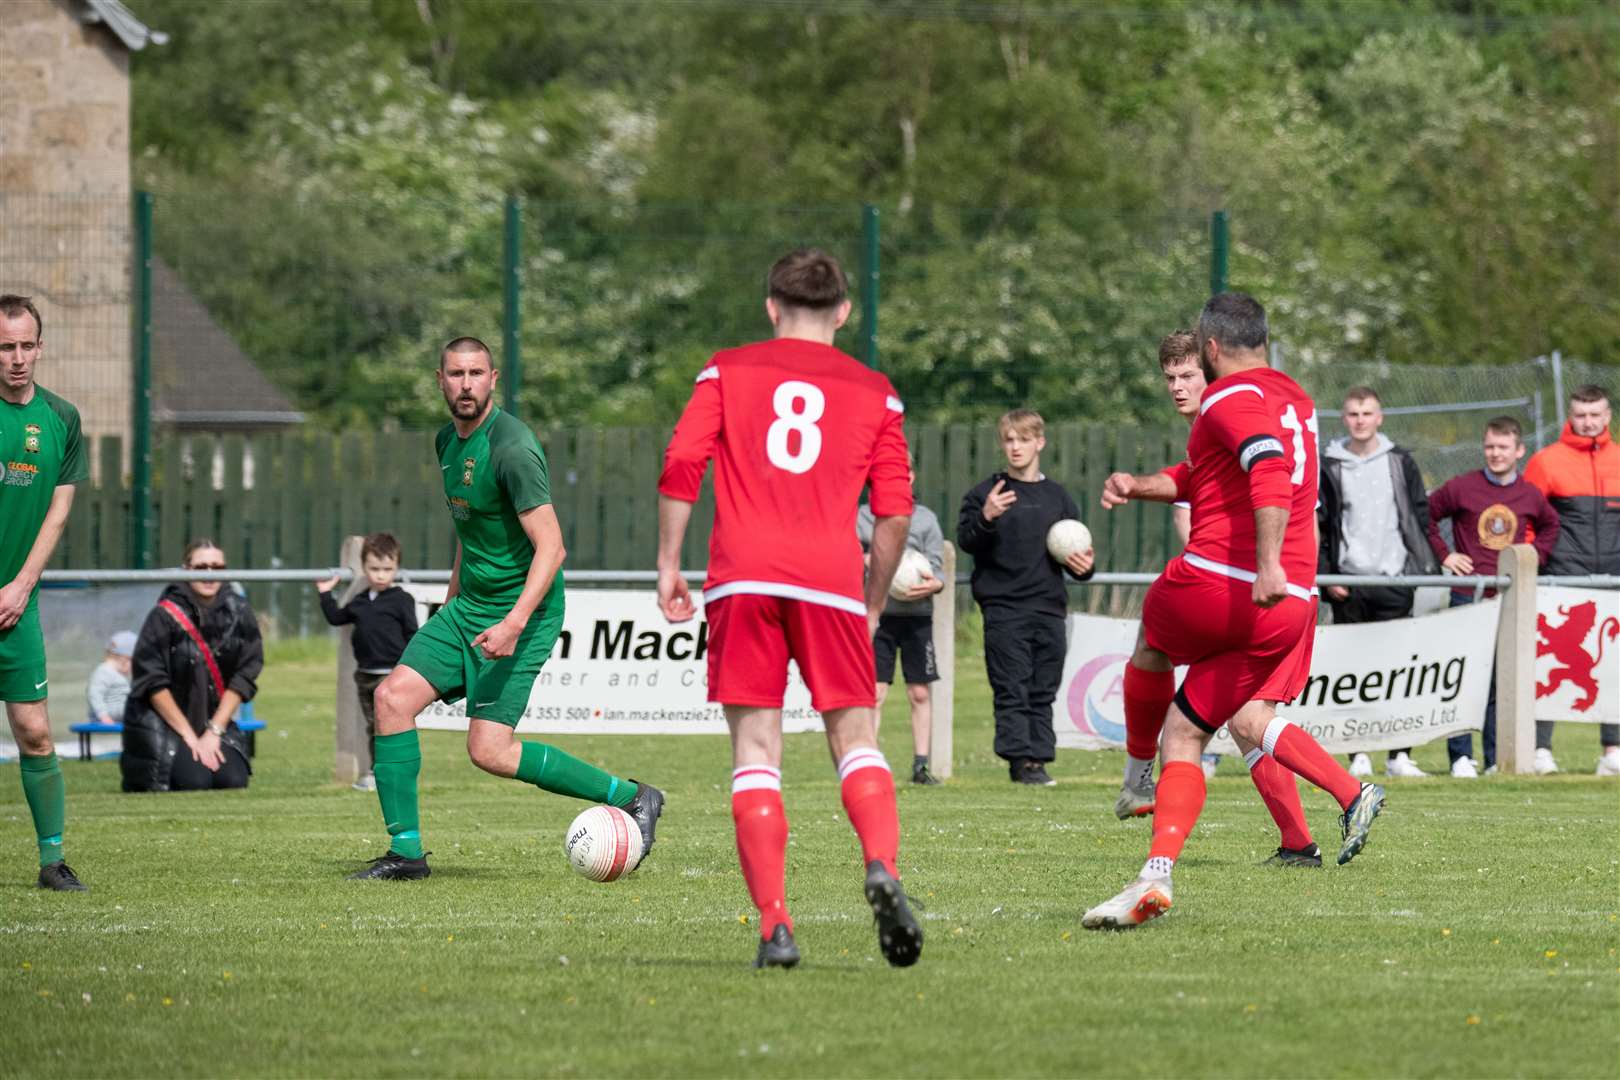 Forres Thistle's Matthew Davidson strikes a late free kick, which deflects off Dufftown stopper Michael Dunn into the net. ..Dufftown FC (2) vs Forres Thistle FC (2) - Dufftown FC win 5-3 on penalties - Elginshire Cup Final held at Logie Park, Forres 14/05/2022...Picture: Daniel Forsyth..